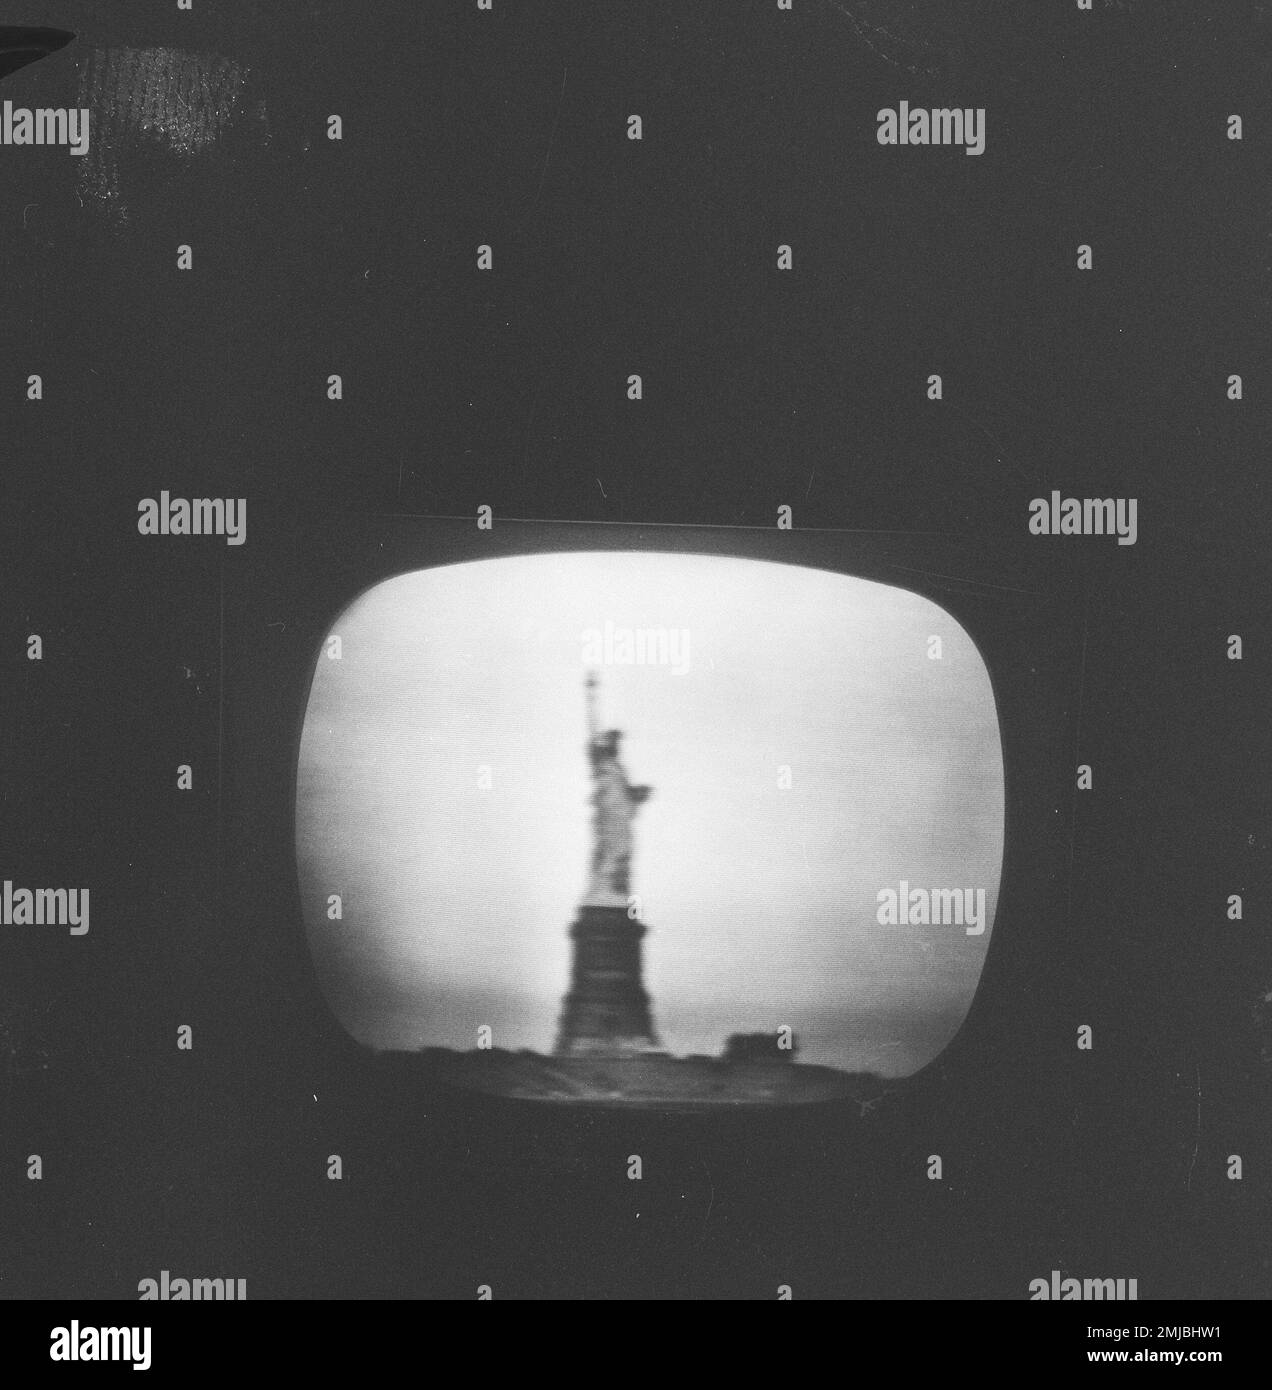 Netherlands History: Telstar on TV, Pictures from Telstar 1 Satellite shown in The Netherlands 'The Statue of Liberty' ; Date: July 23, 1962 Stock Photo